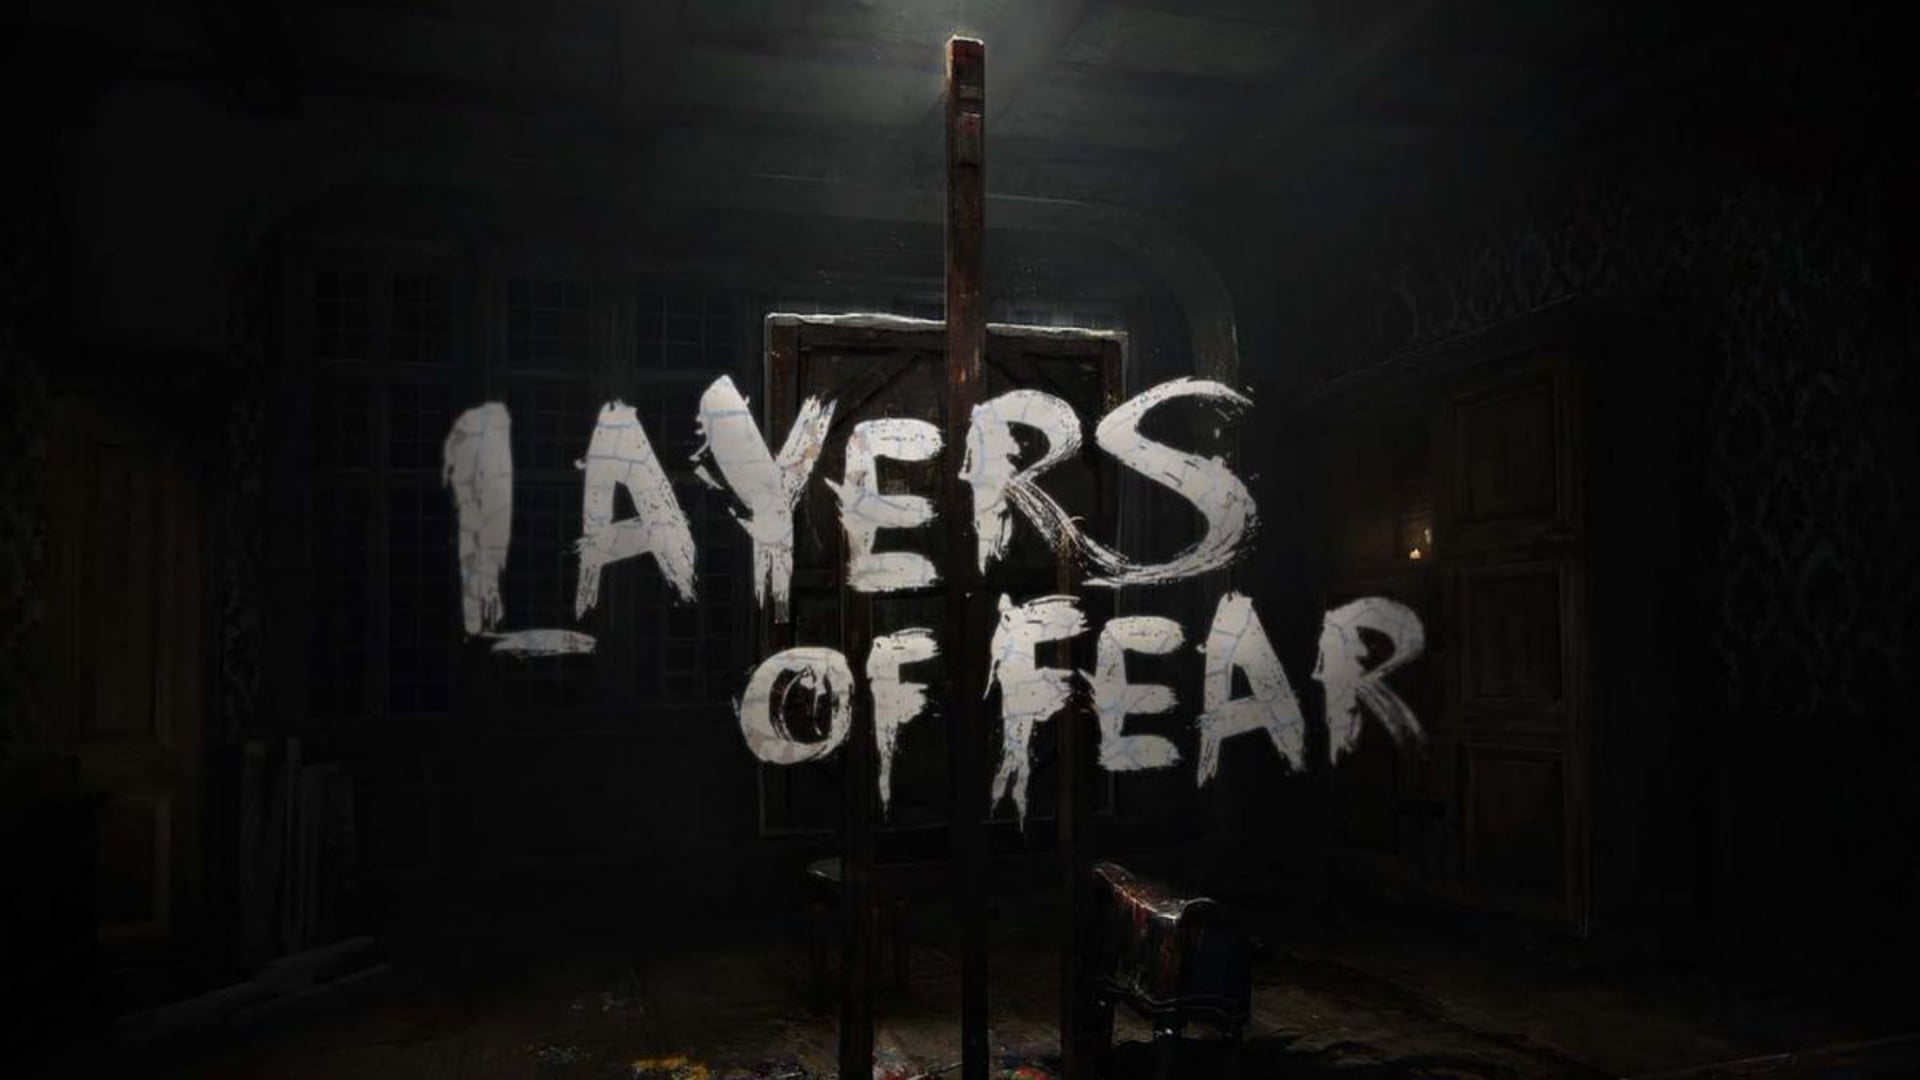 Layers of Fear Gameplay sound design by Christian Zerilli